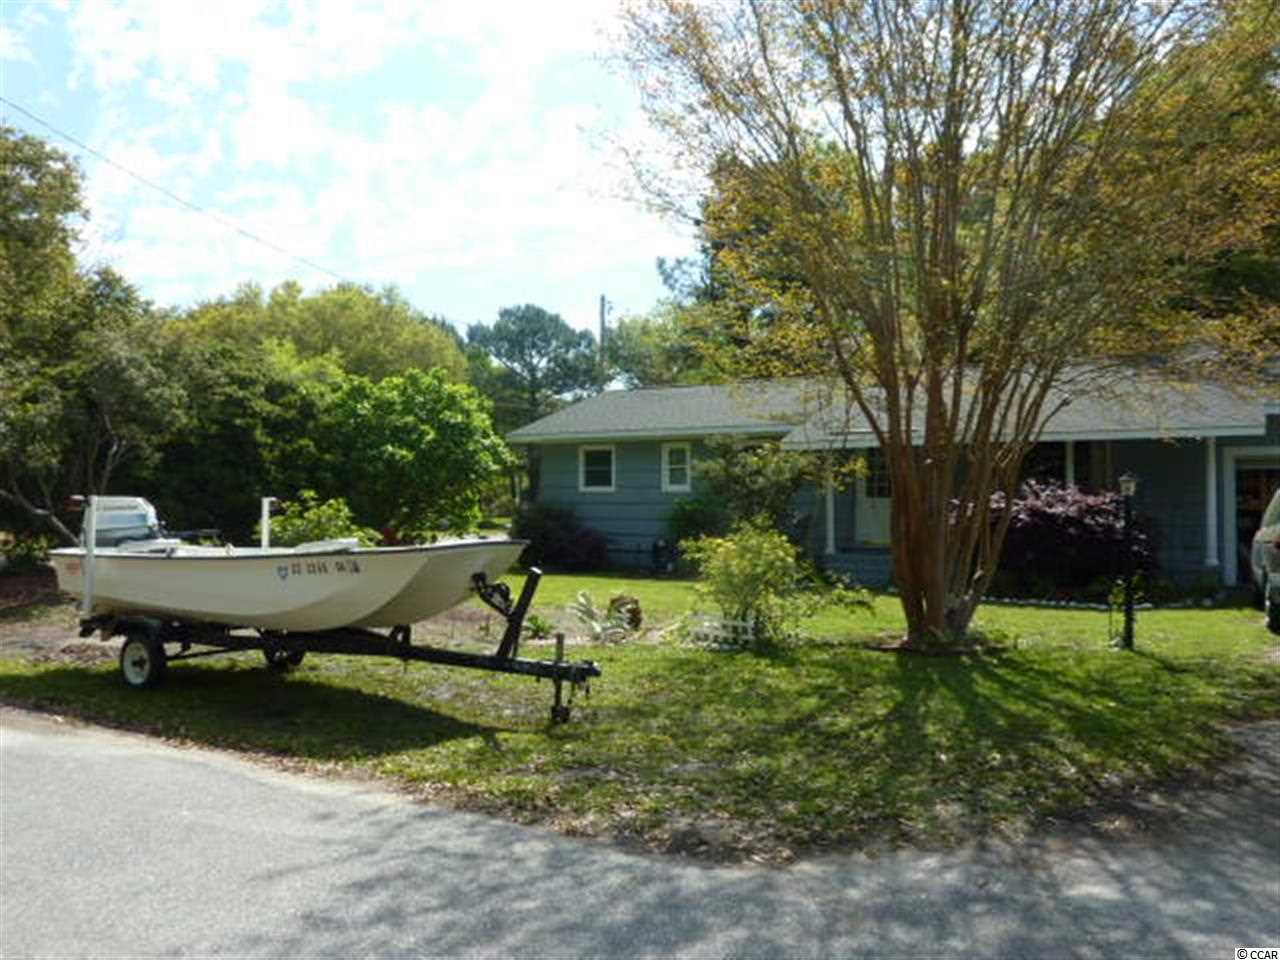 378 S 2nd Ave. N Murrells Inlet, SC 29576